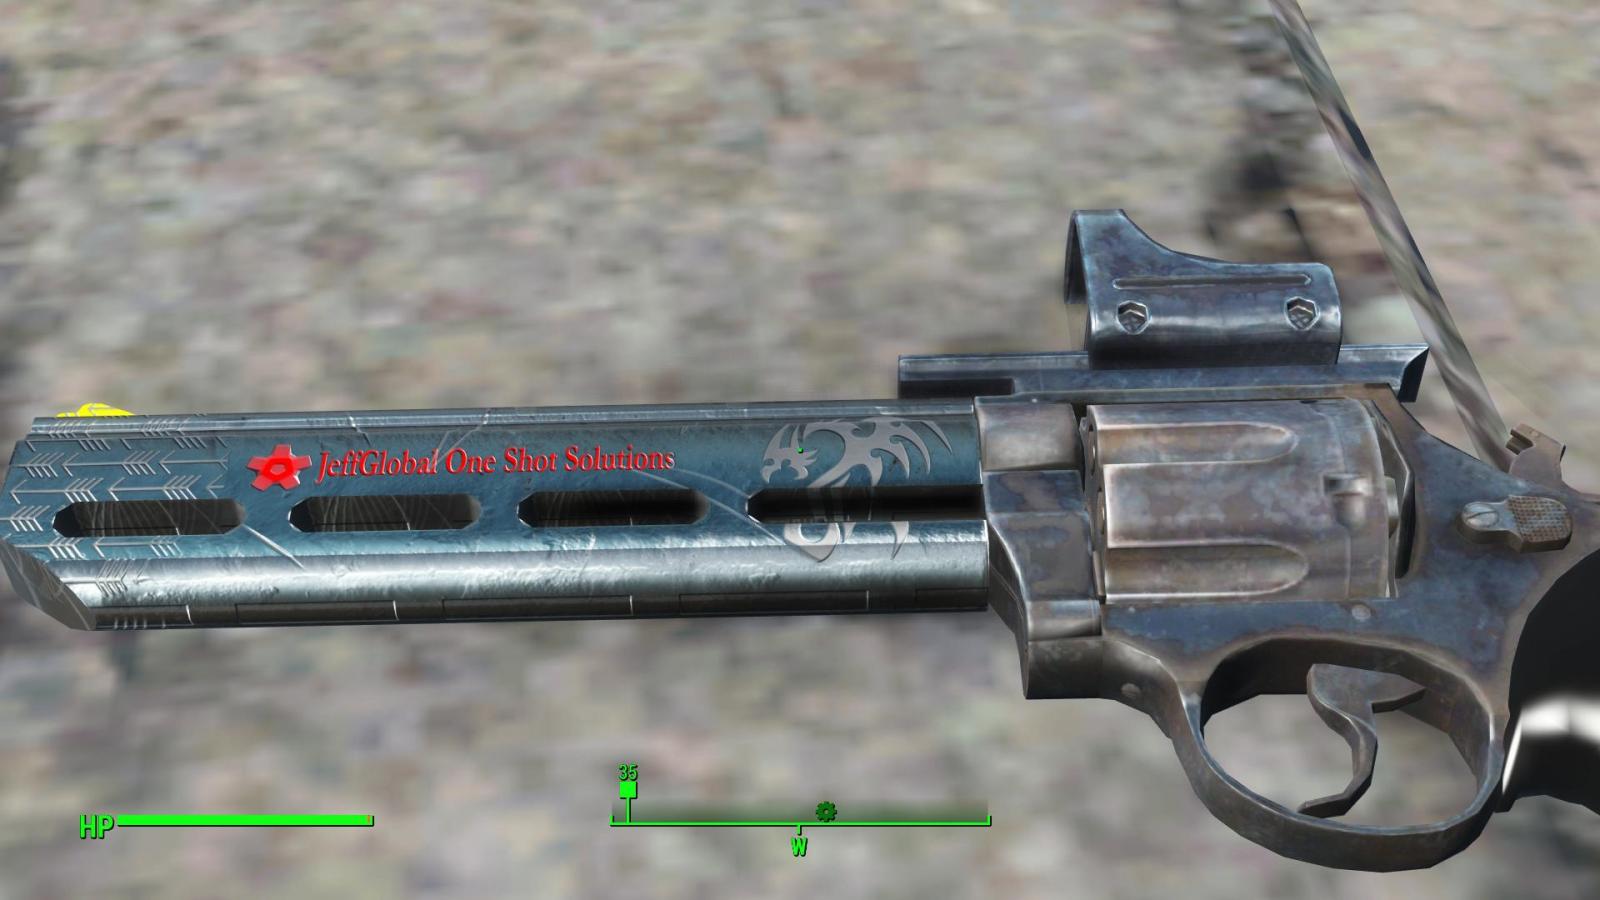 Nightasy Mods - My Fallout 4 Collection - Page 2 - Fallout 4 Adult Mods